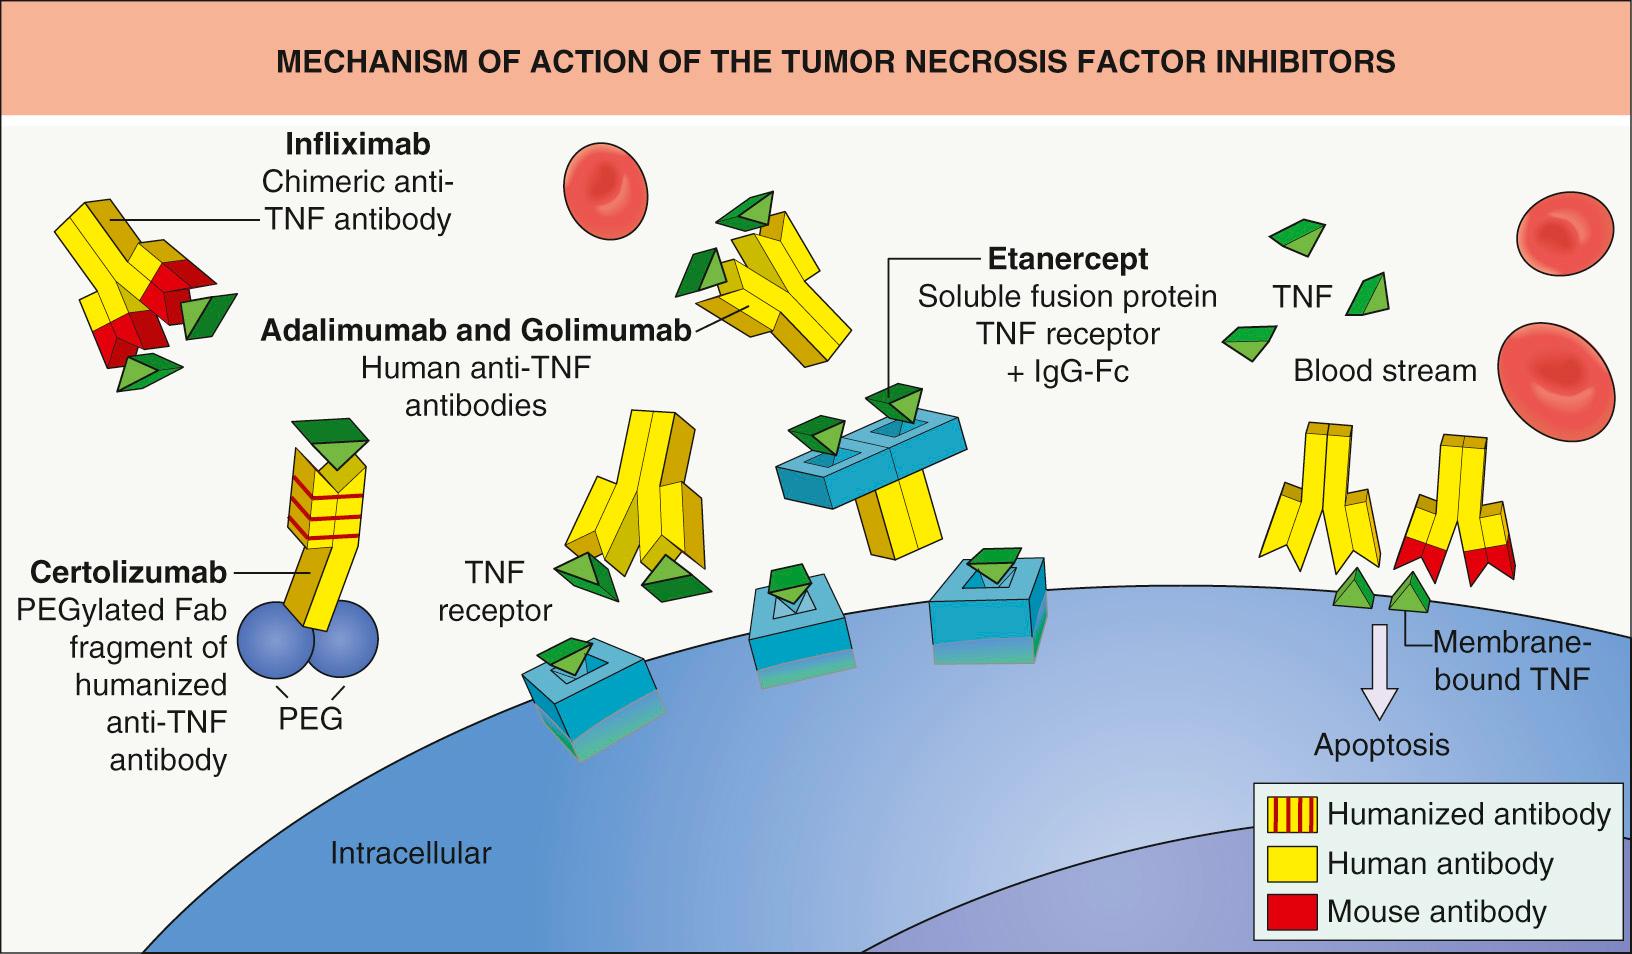 Fig. 128.4, Mechanism of action of the tumor necrosis factor (TNF) inhibitors.